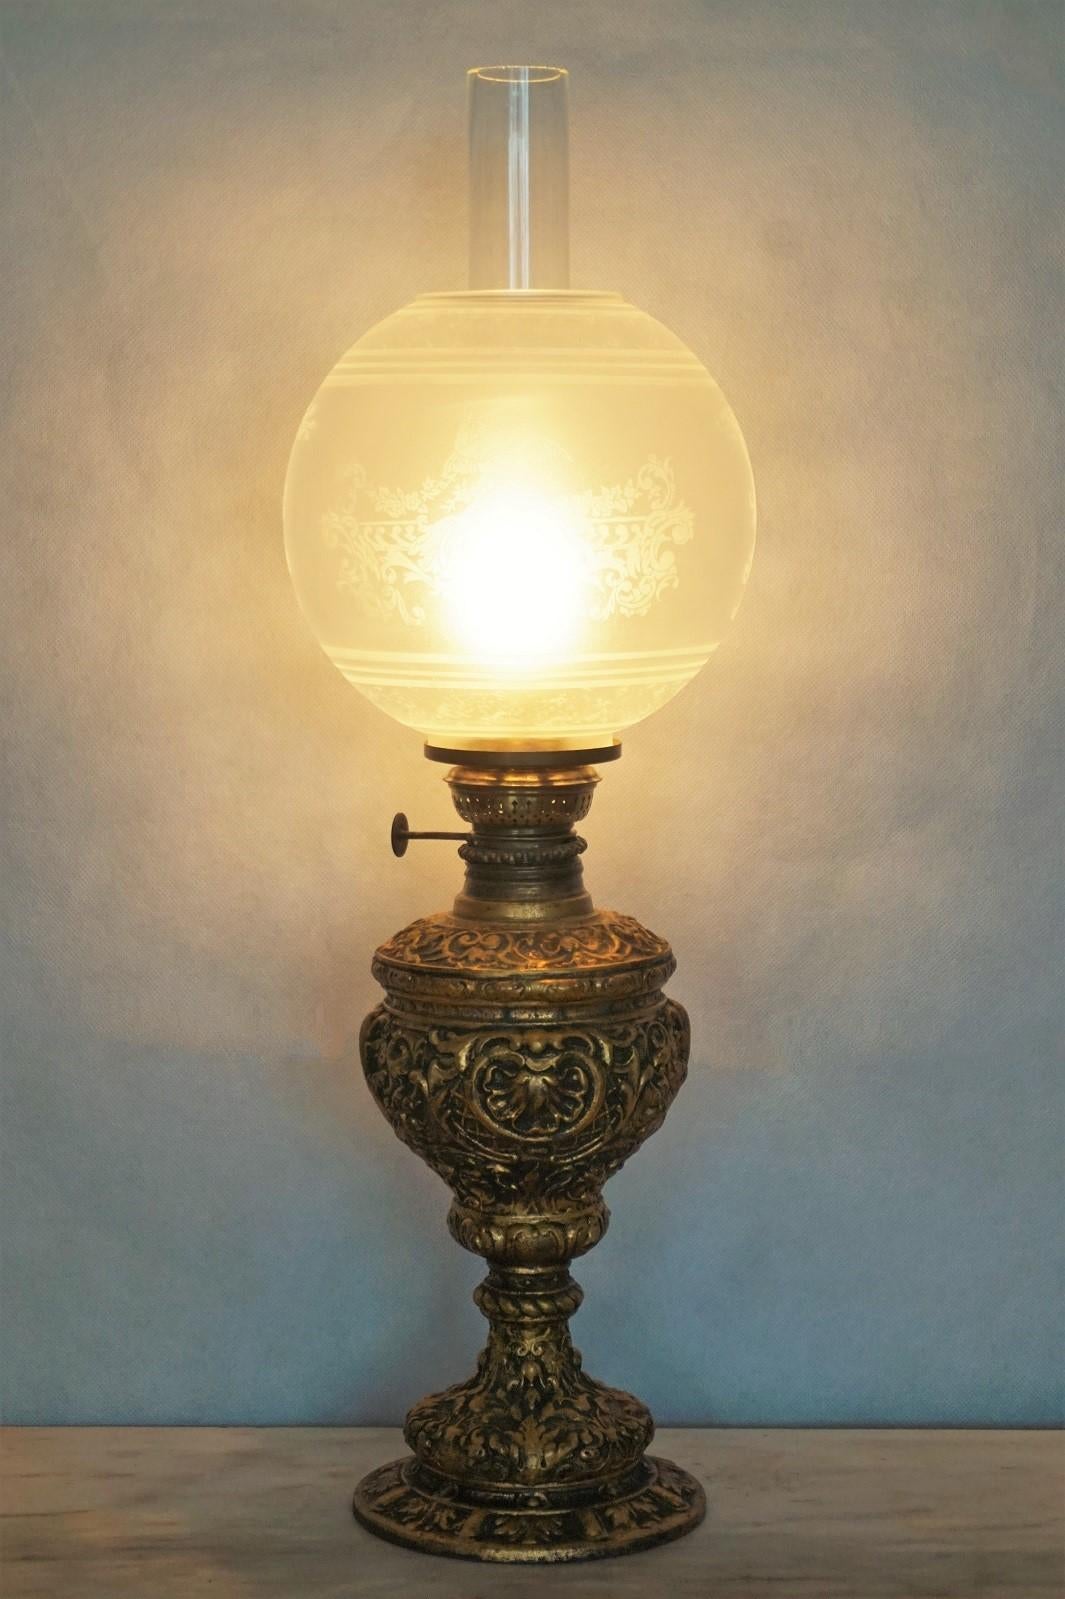 Victorian style heavy cast gilt bronze oil lamp converted to electric table lamp, etched glass globe and clear glass chimney, France, 1880-1890. This oil lamp has been converted to electric in the 1920s.
One Edison E14 brass and porcelain bulb